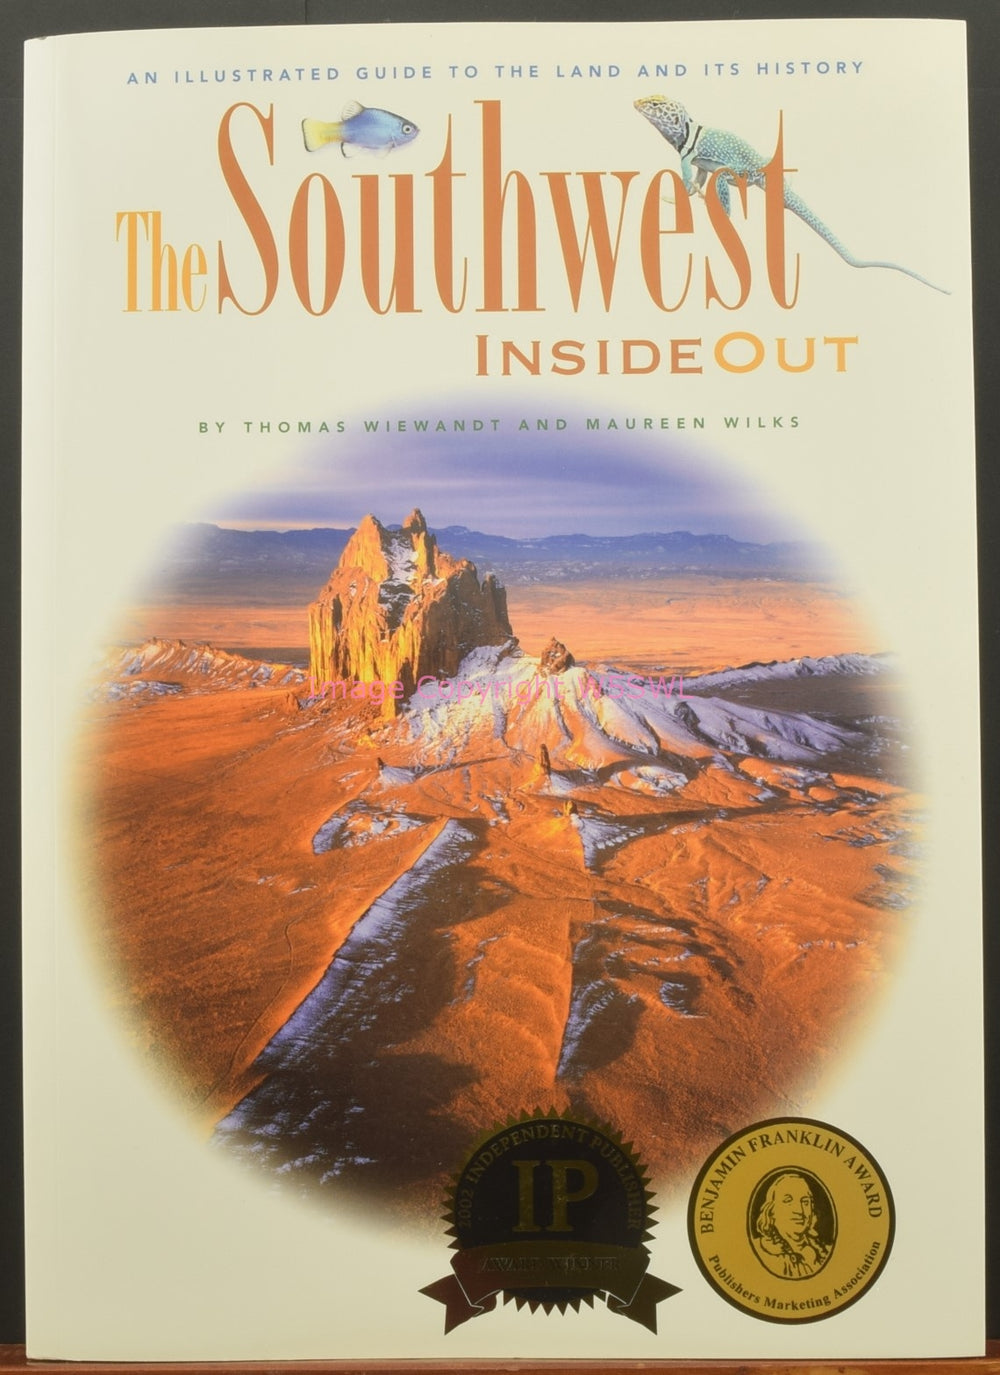 The Southwest Inside Out by Thomas Wiewandt Maureen Wilks - Dave's Hobby Shop by W5SWL